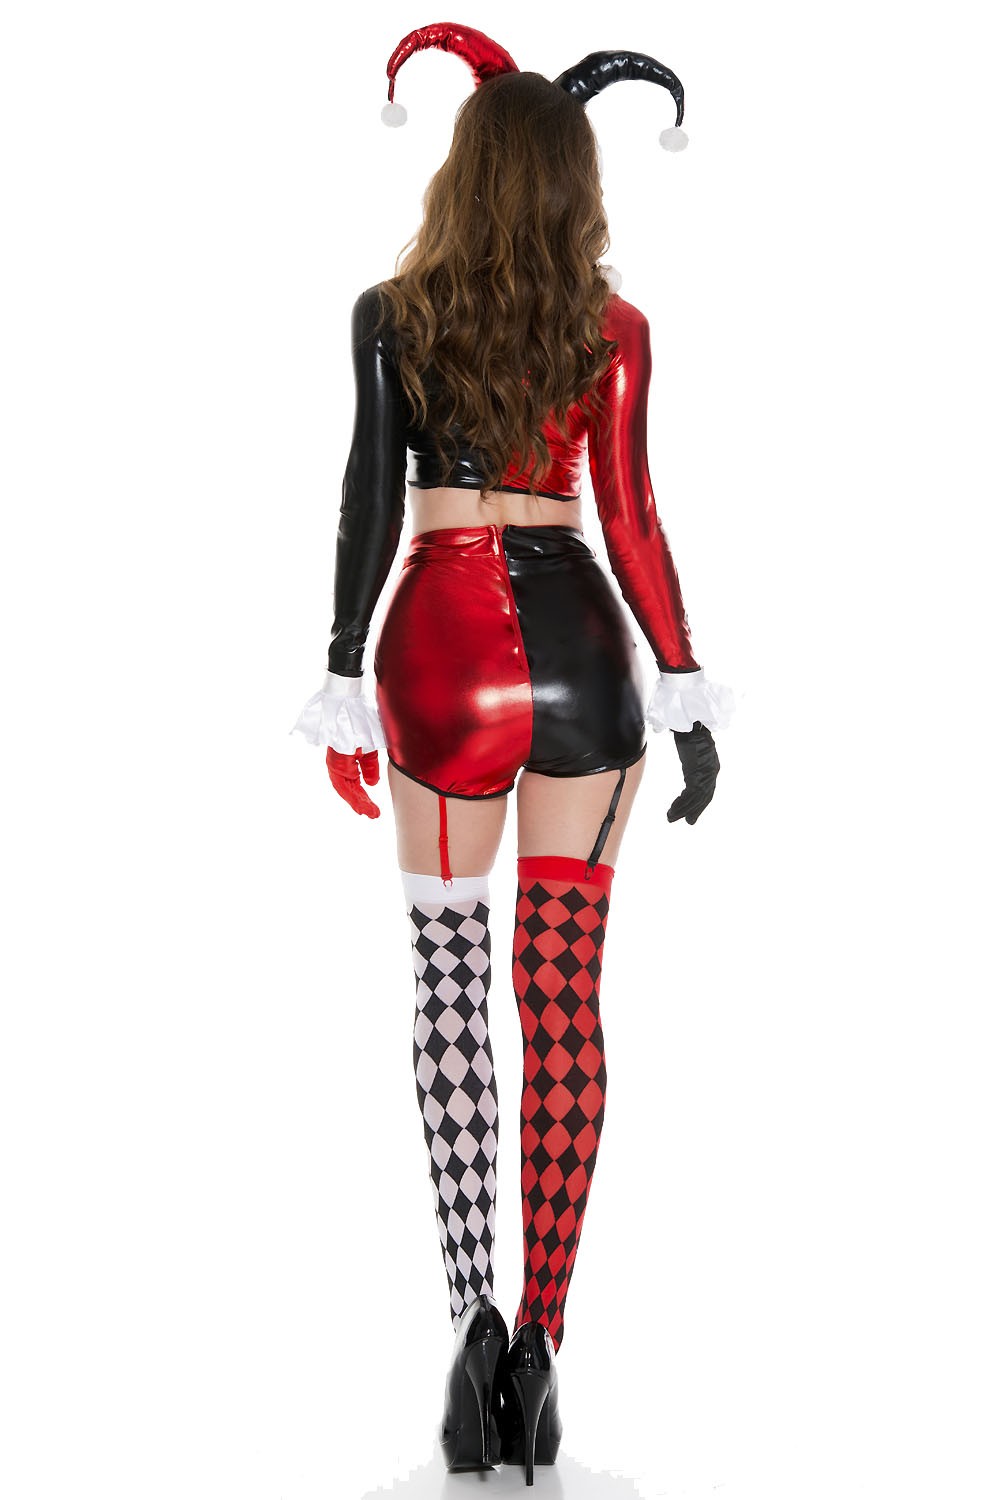 Adult Gorgeous Harlequin Woman Costume | $41.99 | The Costume Land